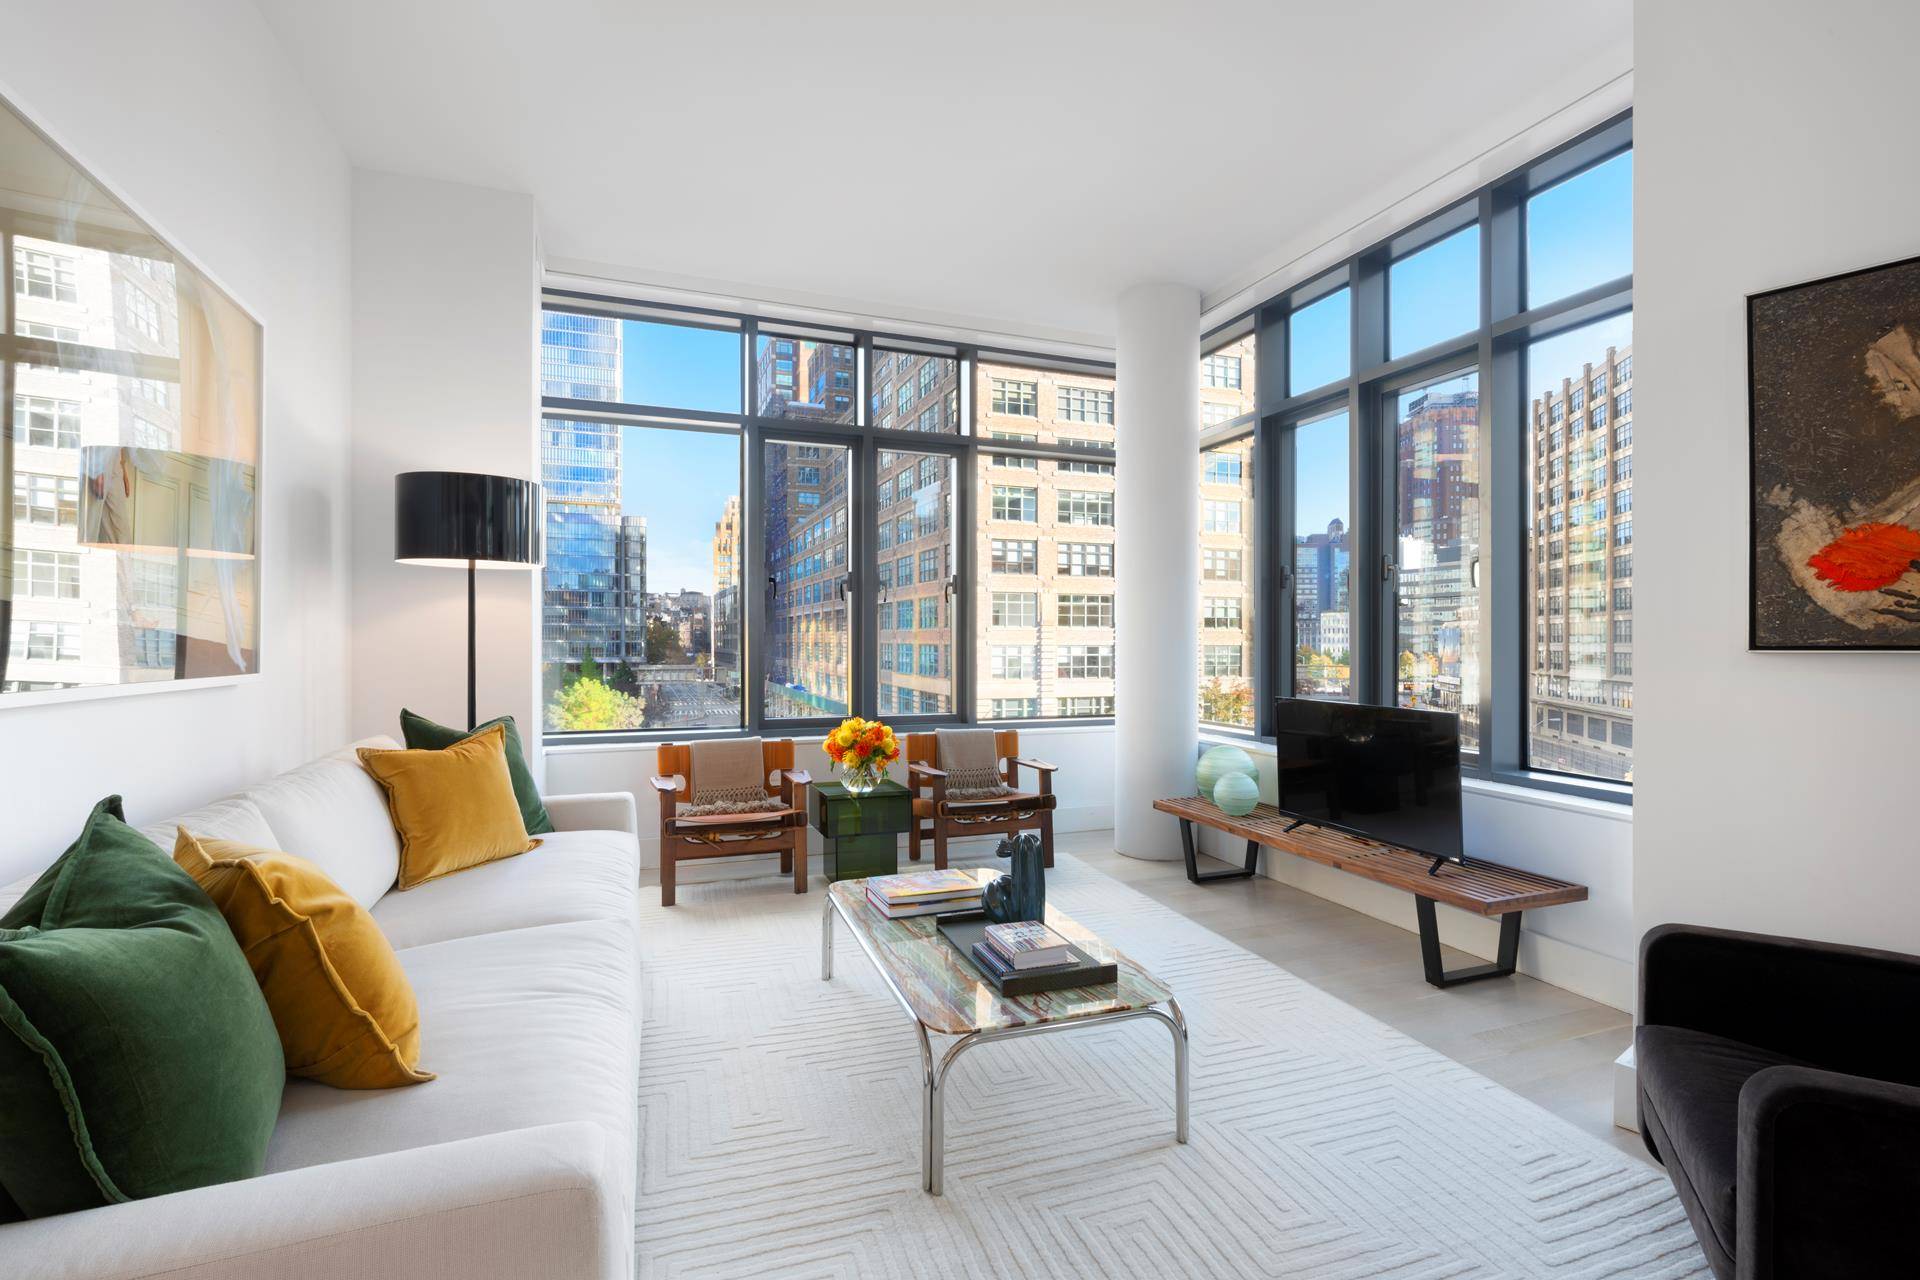 Introducing residence 7D at The Riverview, a new boutique residential condominium with architecture and interiors by award winning Rawlings Architects, located at the crossroads of TriBeCa, the West Village, and ...